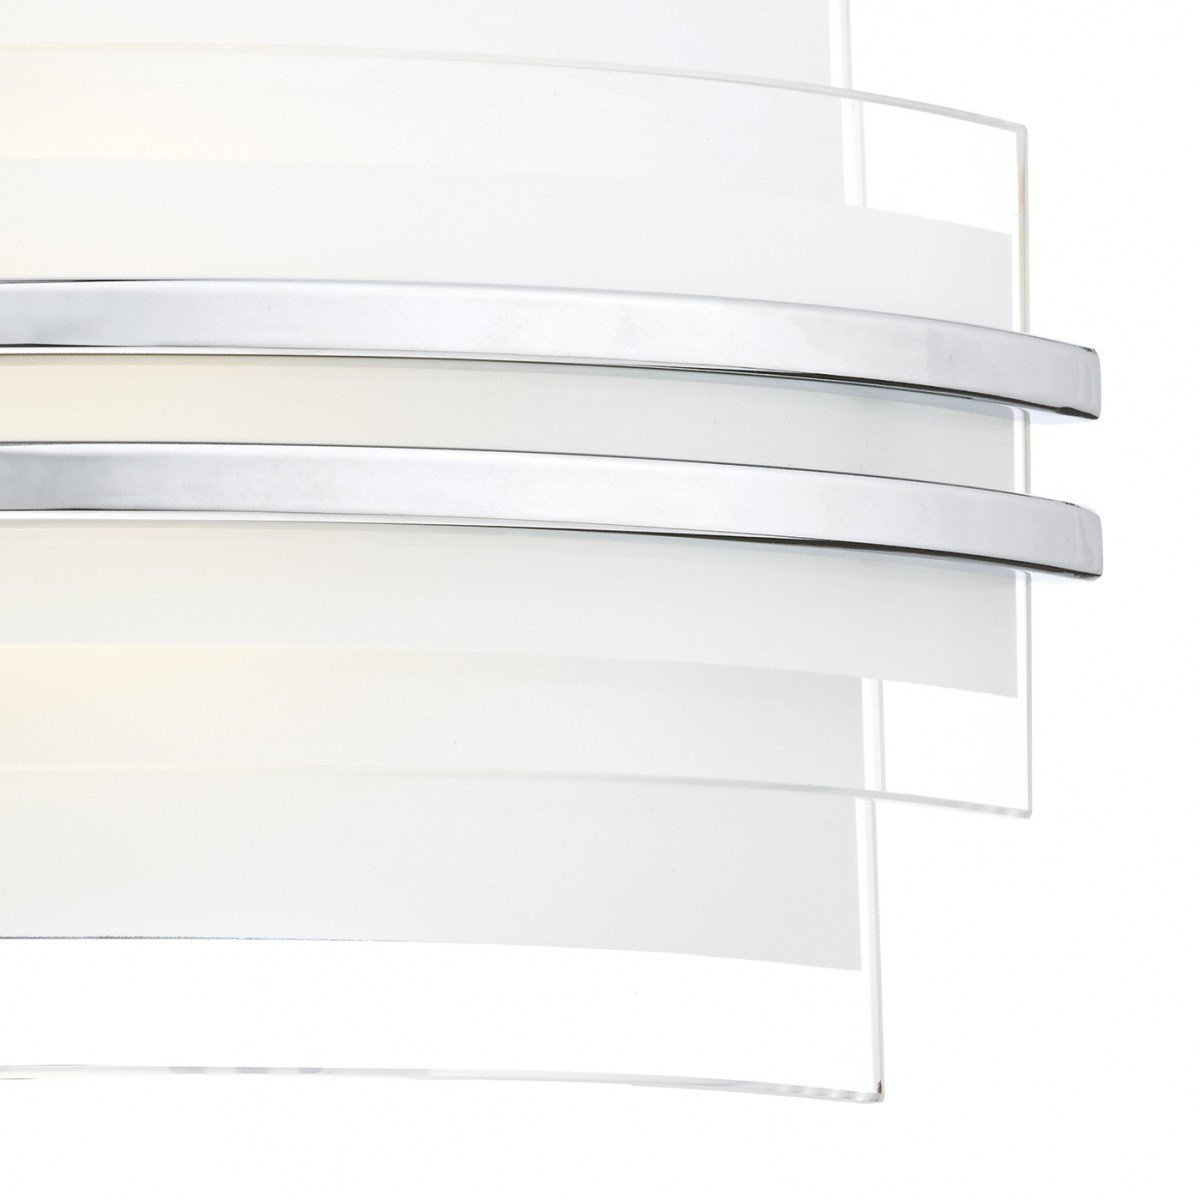 Sector White Small Double Trim Led Wall Bracket - London Lighting - 4